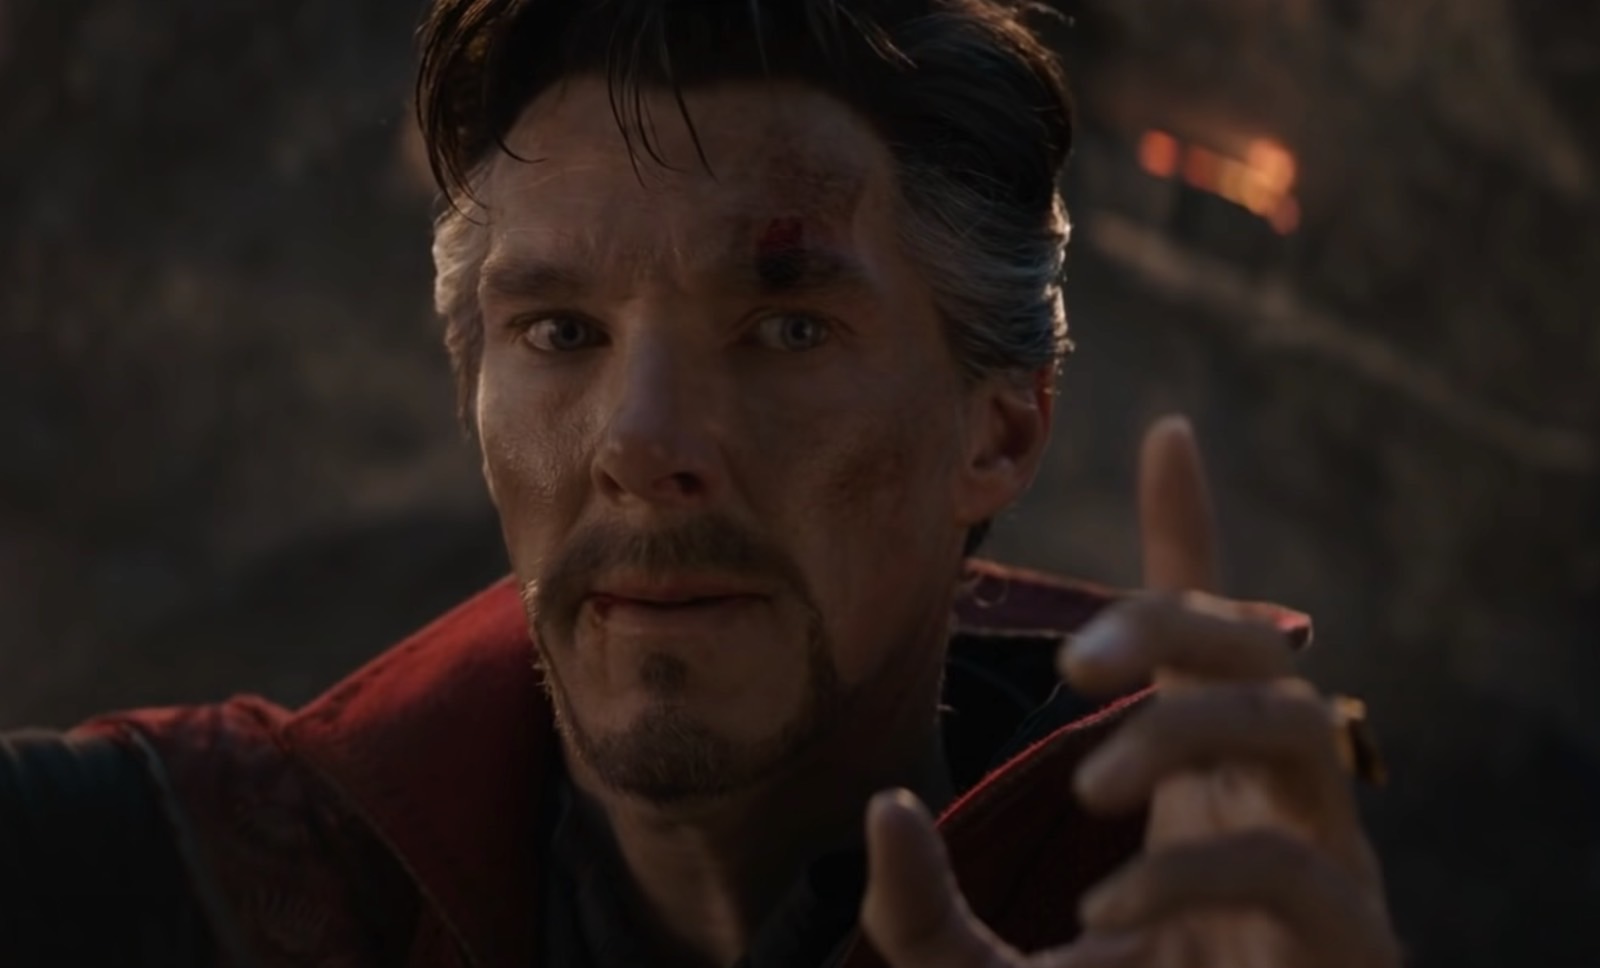 Doctor Strange 2 director says fans will get what they want, not what they expect